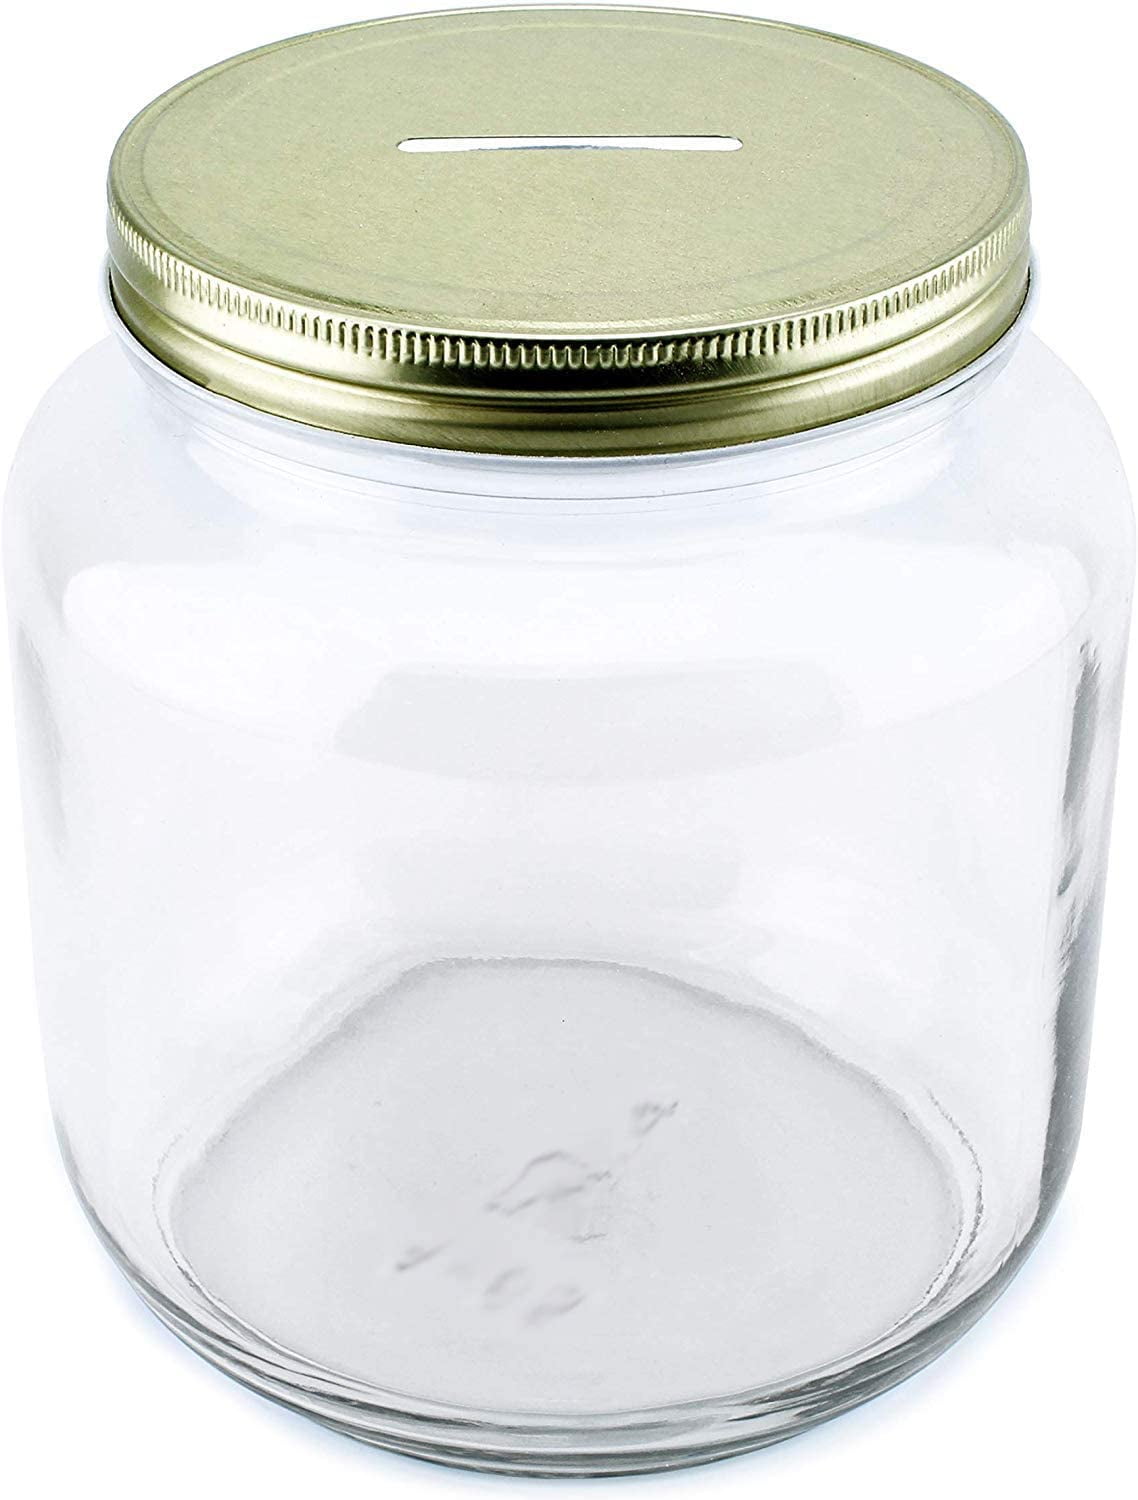 Cornucopia Large Coin Bank JAR; Half Gallon Clear Glass Piggy Bank with Gold Slotted Lid